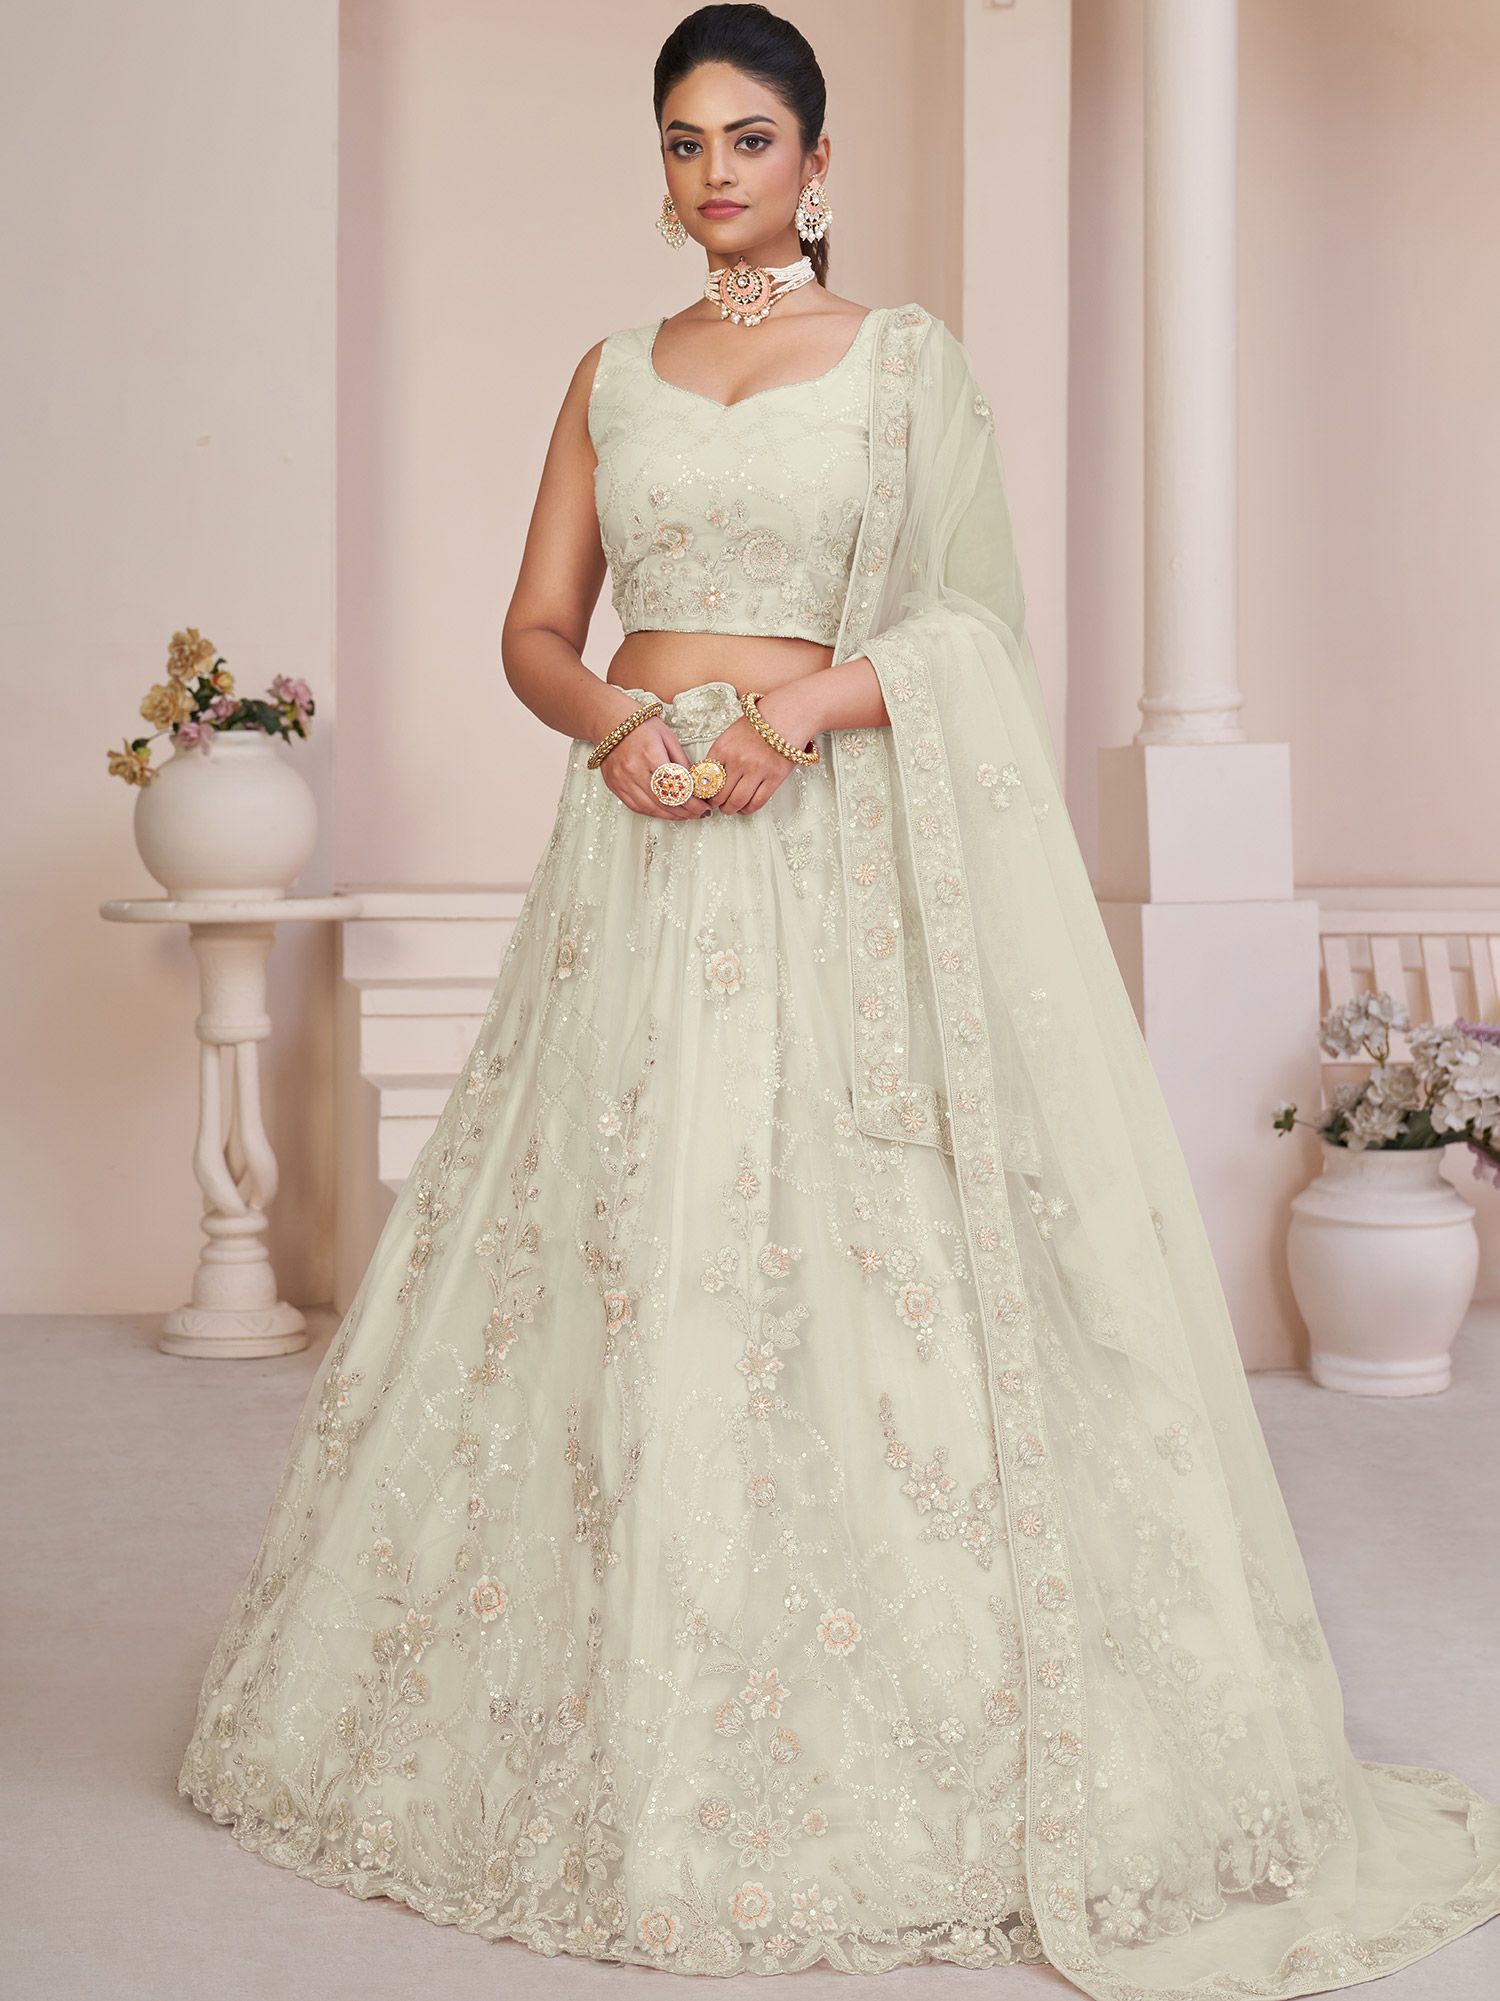 Designer Cream Color Indian Bridesmaid Bridal Wedding Lehengas With high  Quality Embroidery Thread & Sequence Work for Women. - sethnik.com